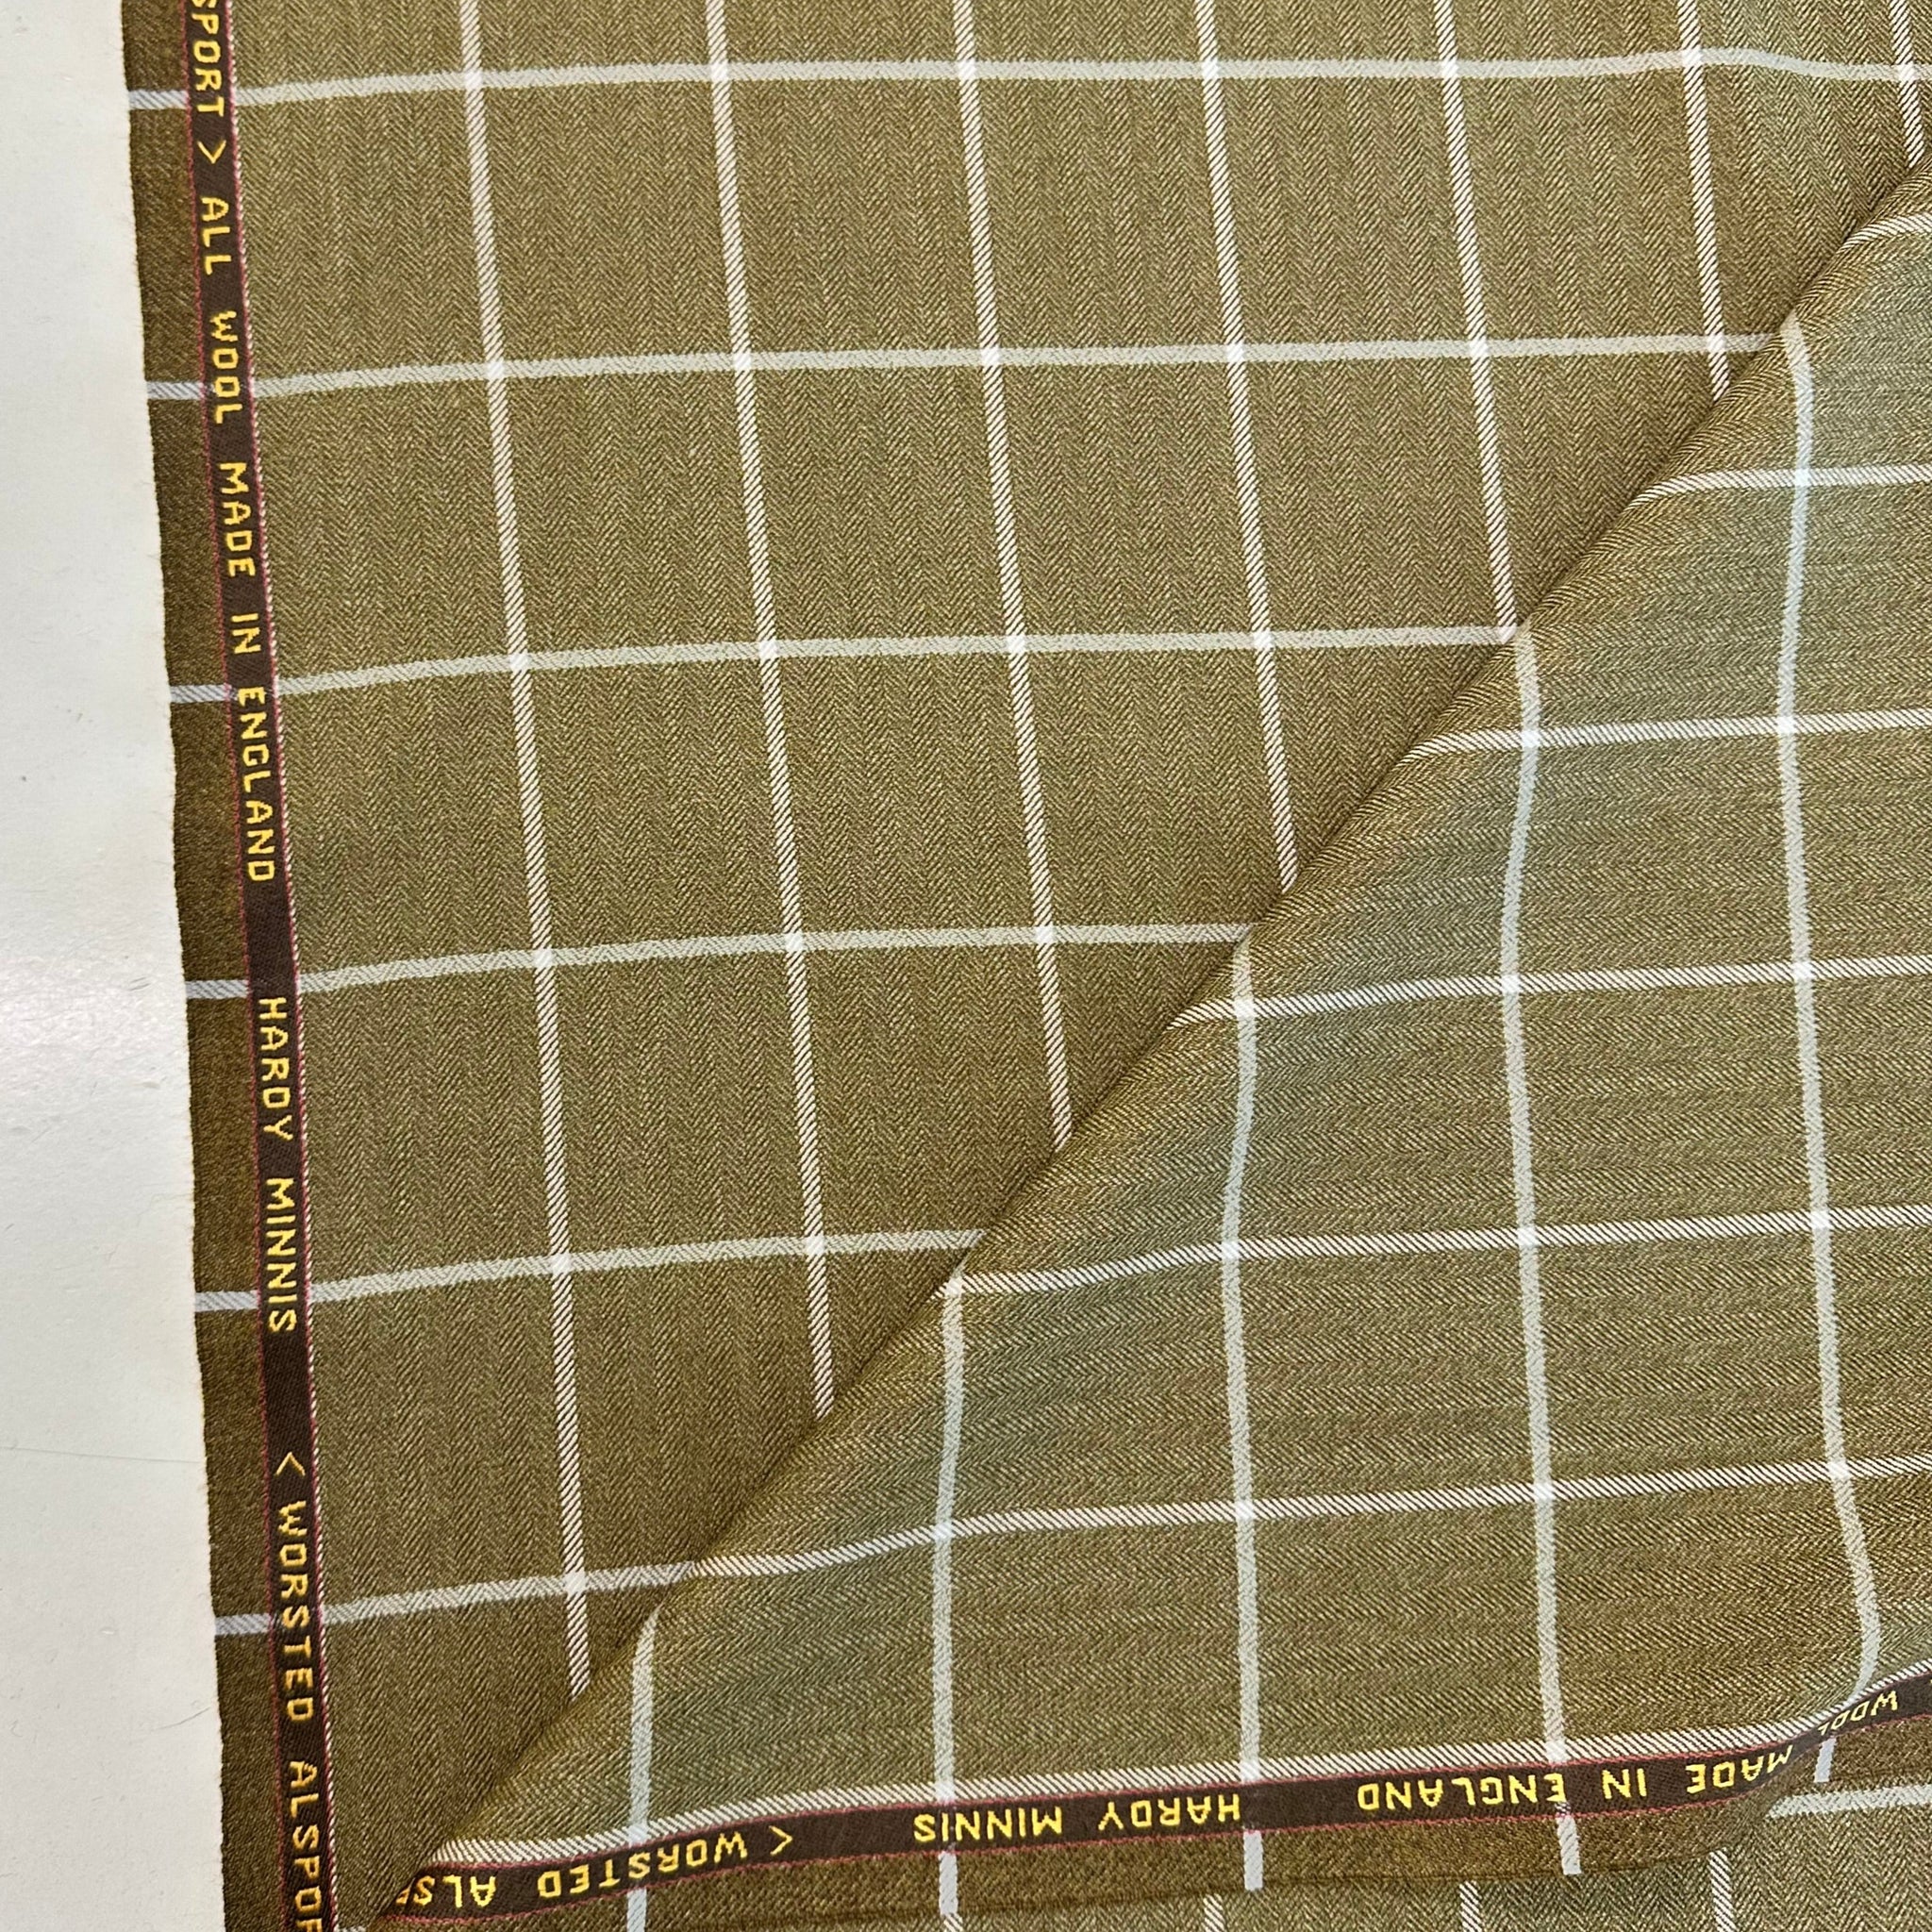 Worsted Alsport All Wool Olive Green With Cream Check By Hardy Minnis Made In England